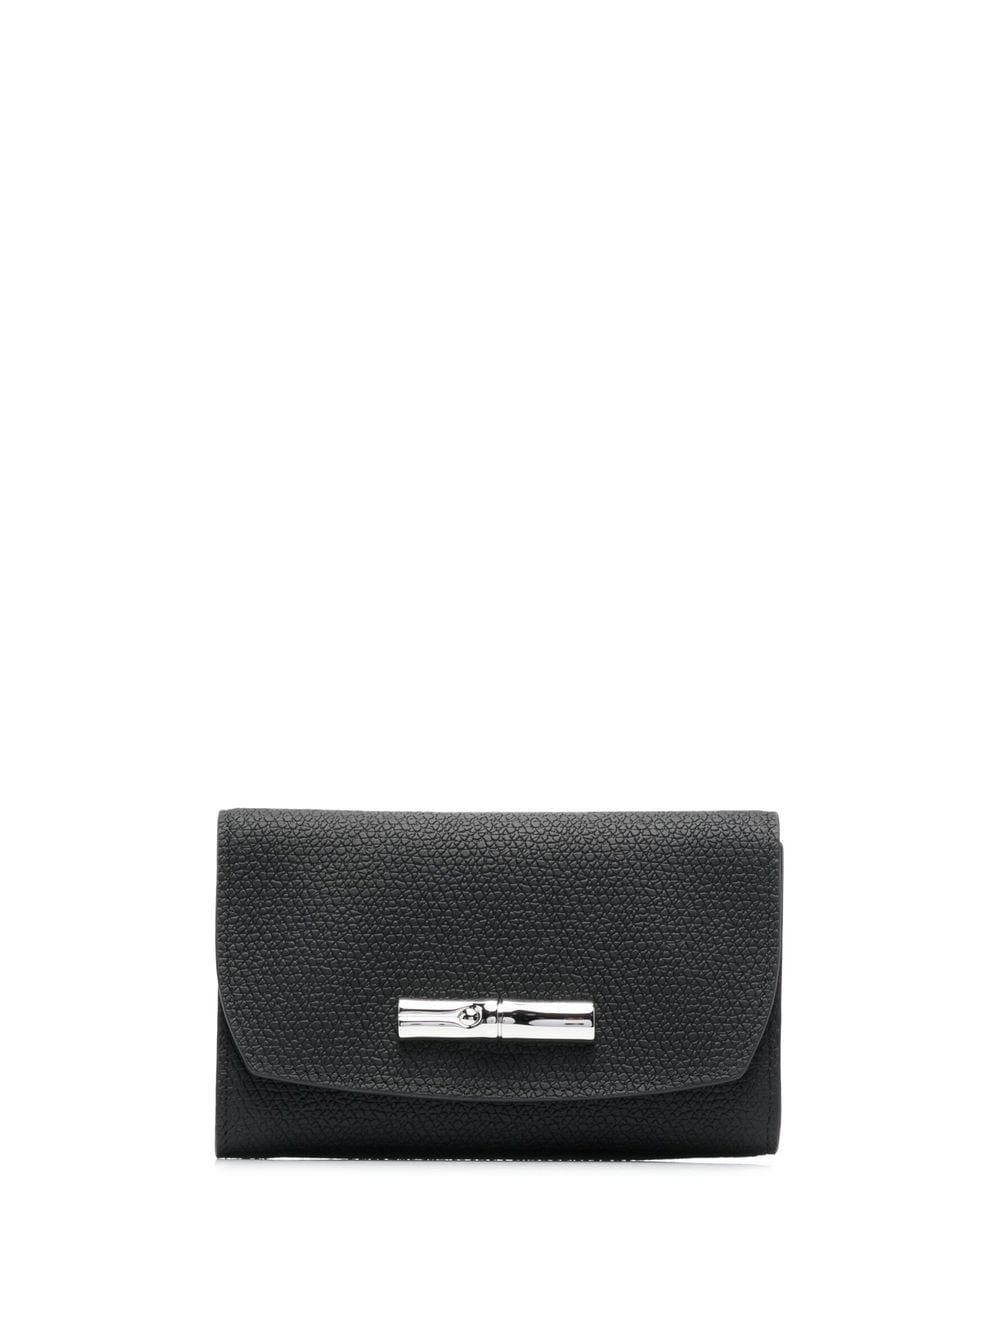 Longchamp Roseau Compact Leather Wallet In Black